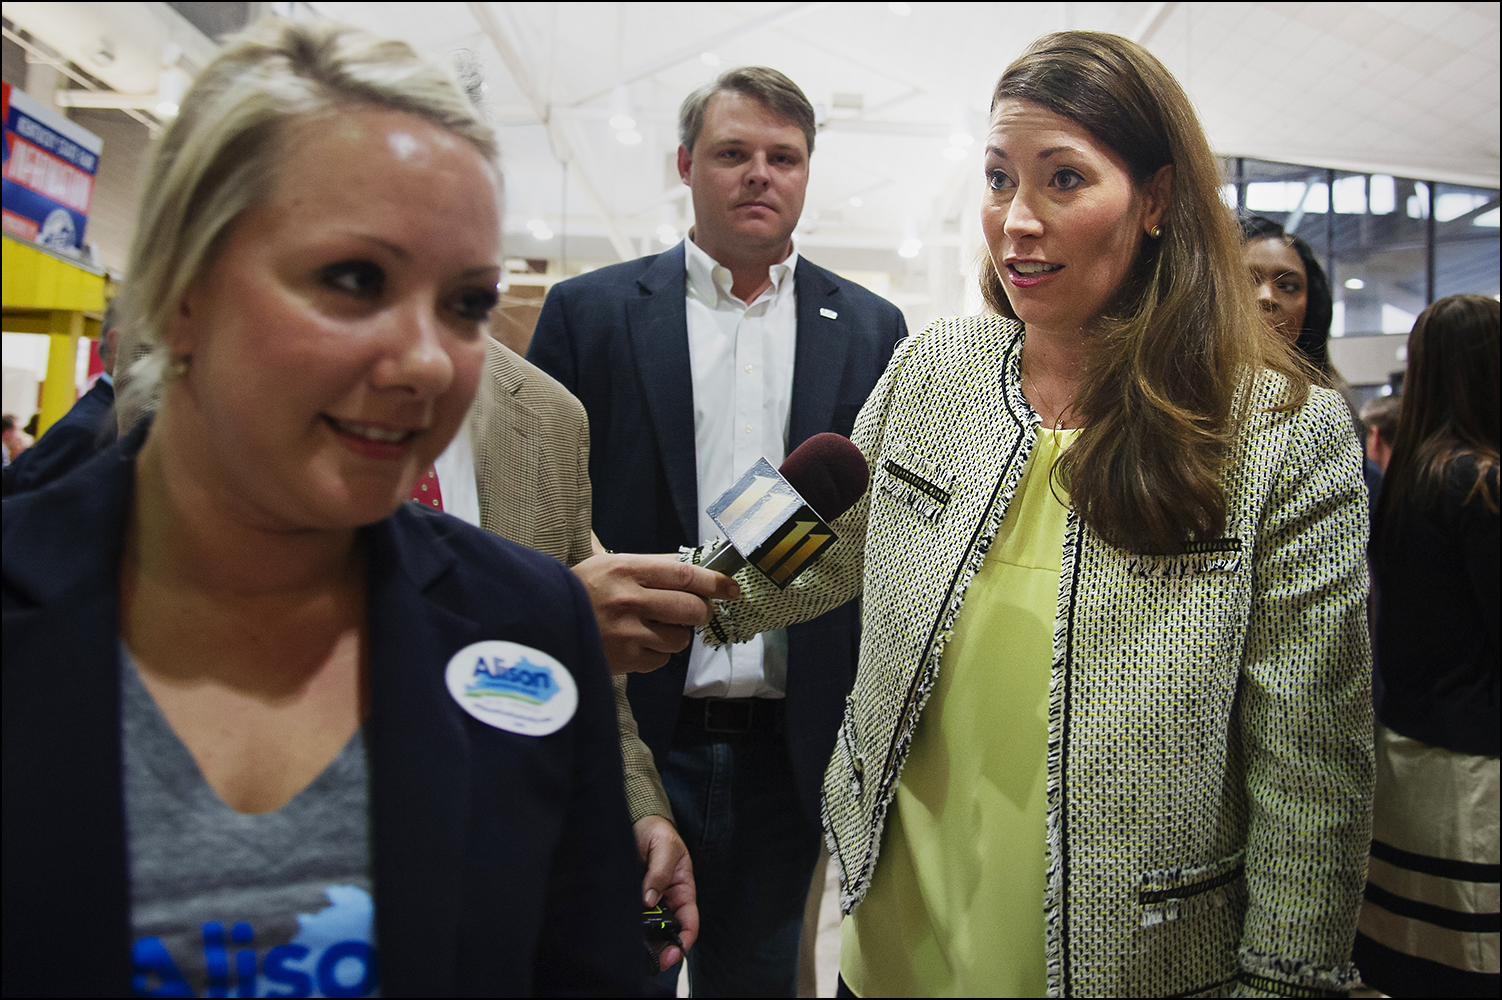  Kentucky Secretary of State and U.S. Senate candidate Alison Lundergan Grimes is greeted by media members after arriving at the 51st annual Kentucky Country Ham Breakfast at the state fair in Louisville, KY on Thursday, August 21, 2014. Photos by Br